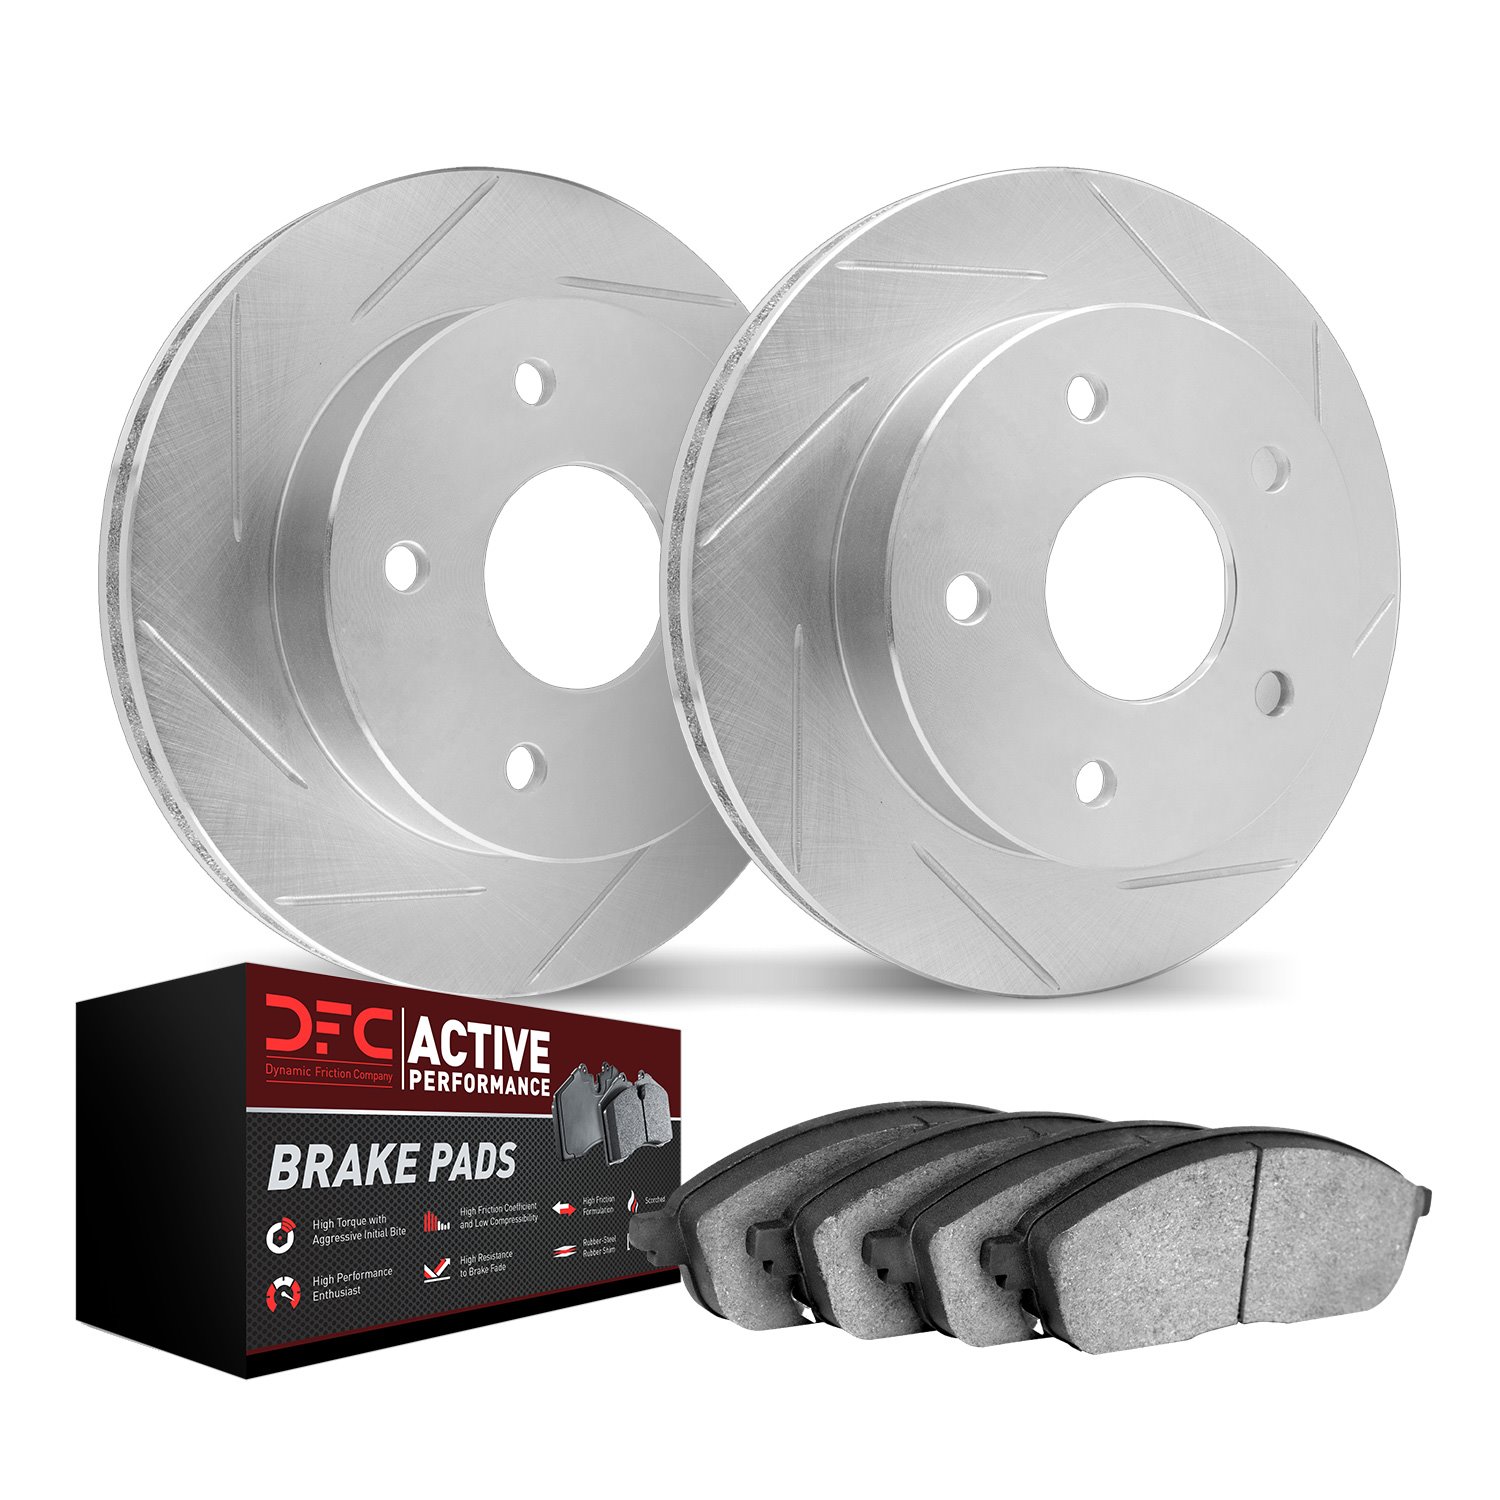 2702-46051 Geoperformance Slotted Brake Rotors with Active Performance Pads Kits, Fits Select GM, Position: Front